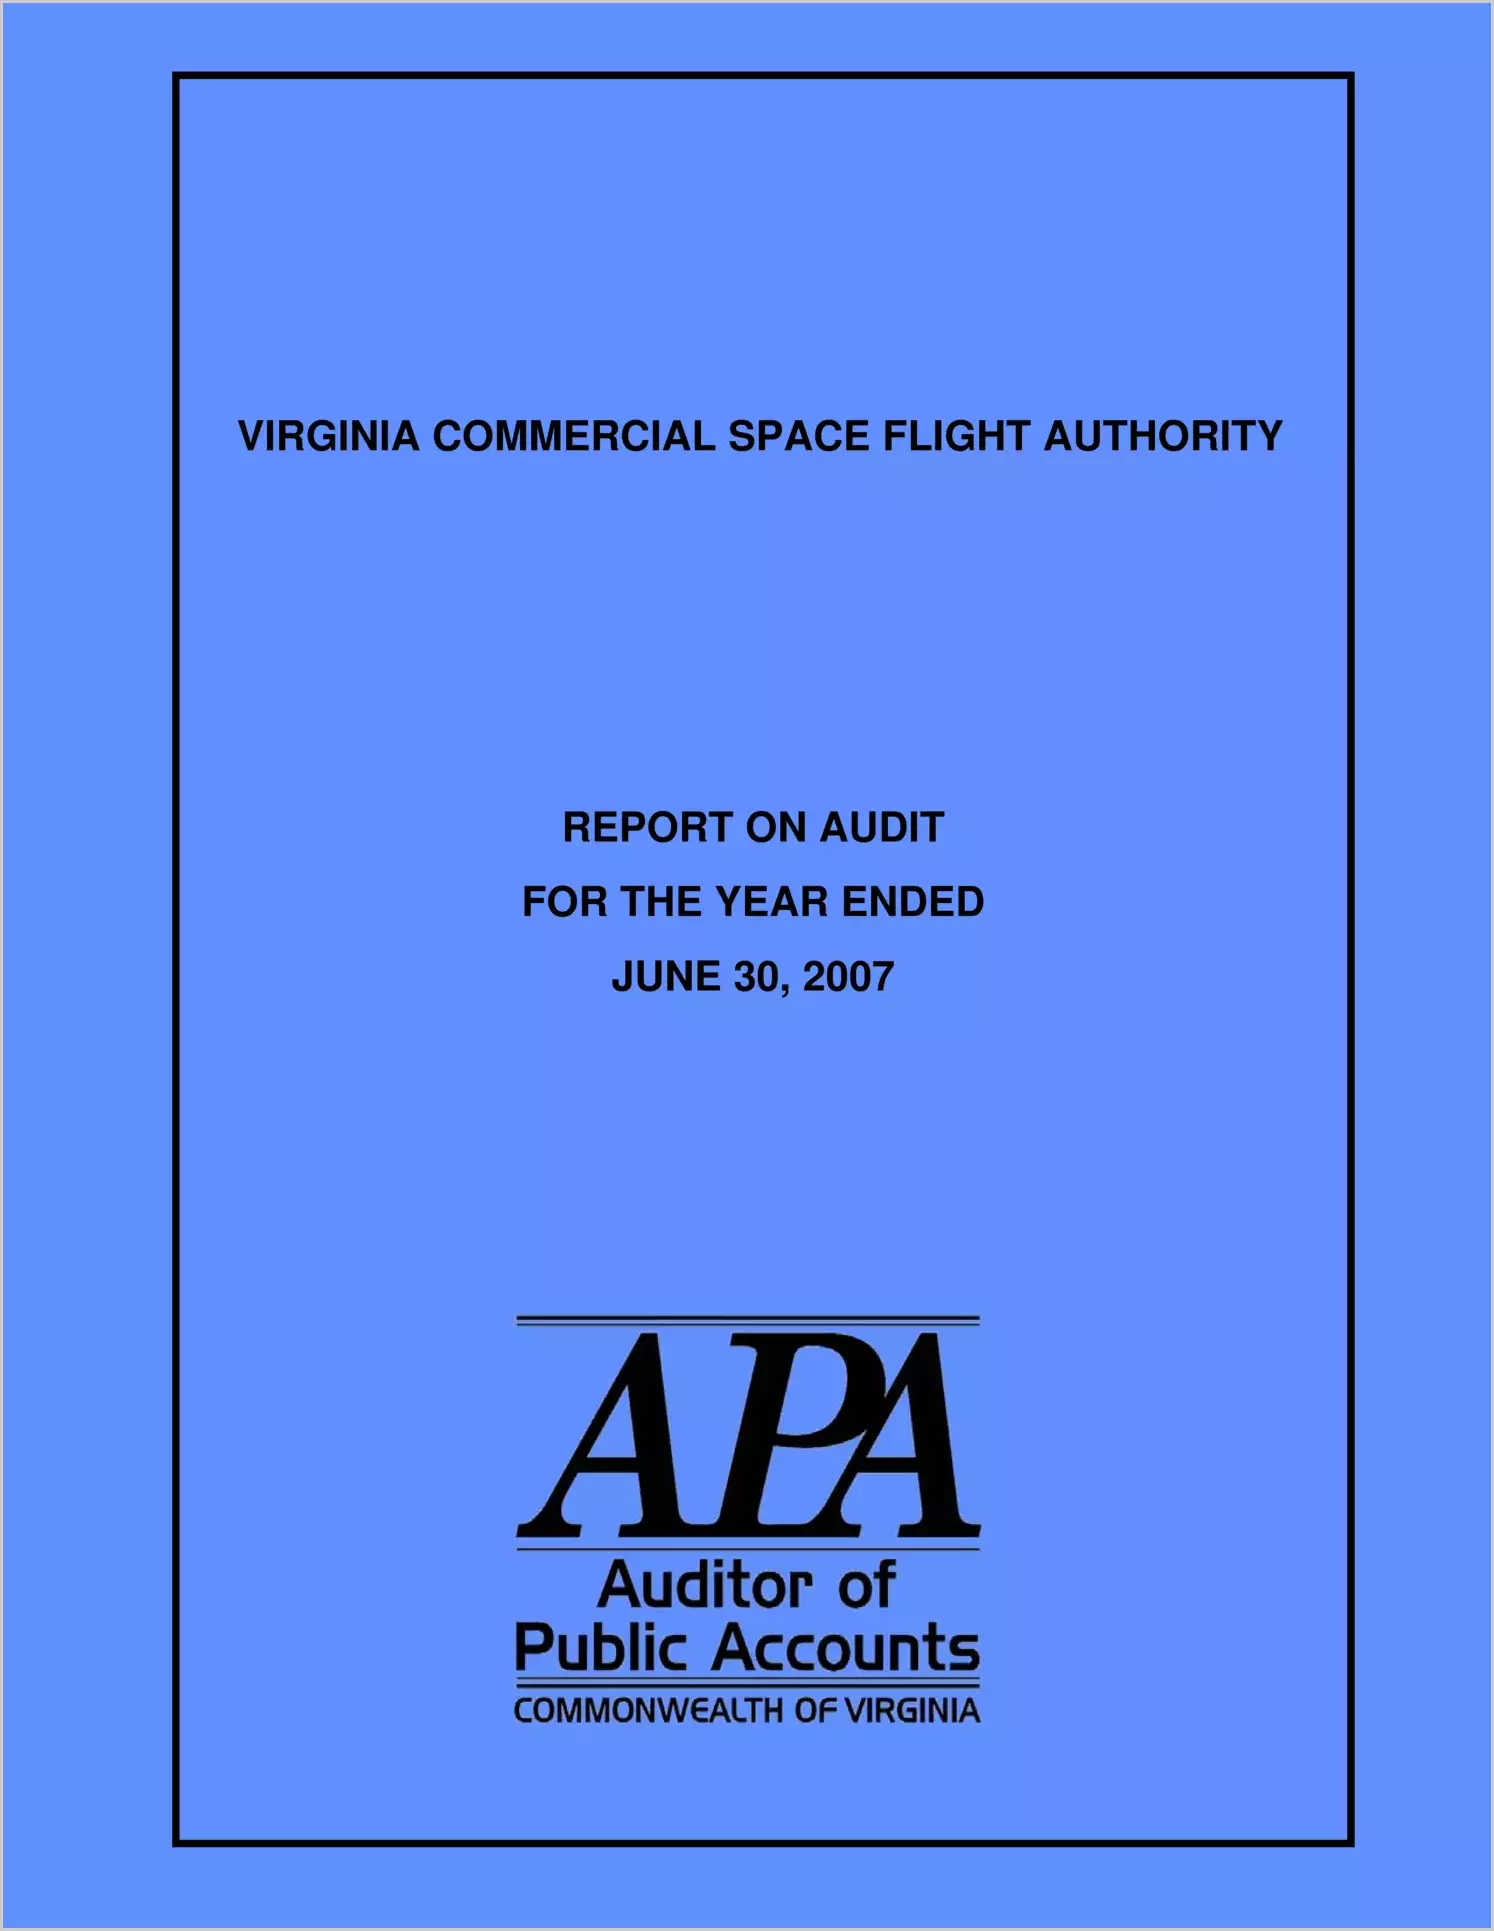 Virginia Commercial Space Flight Authority for the year ended June 30, 2007